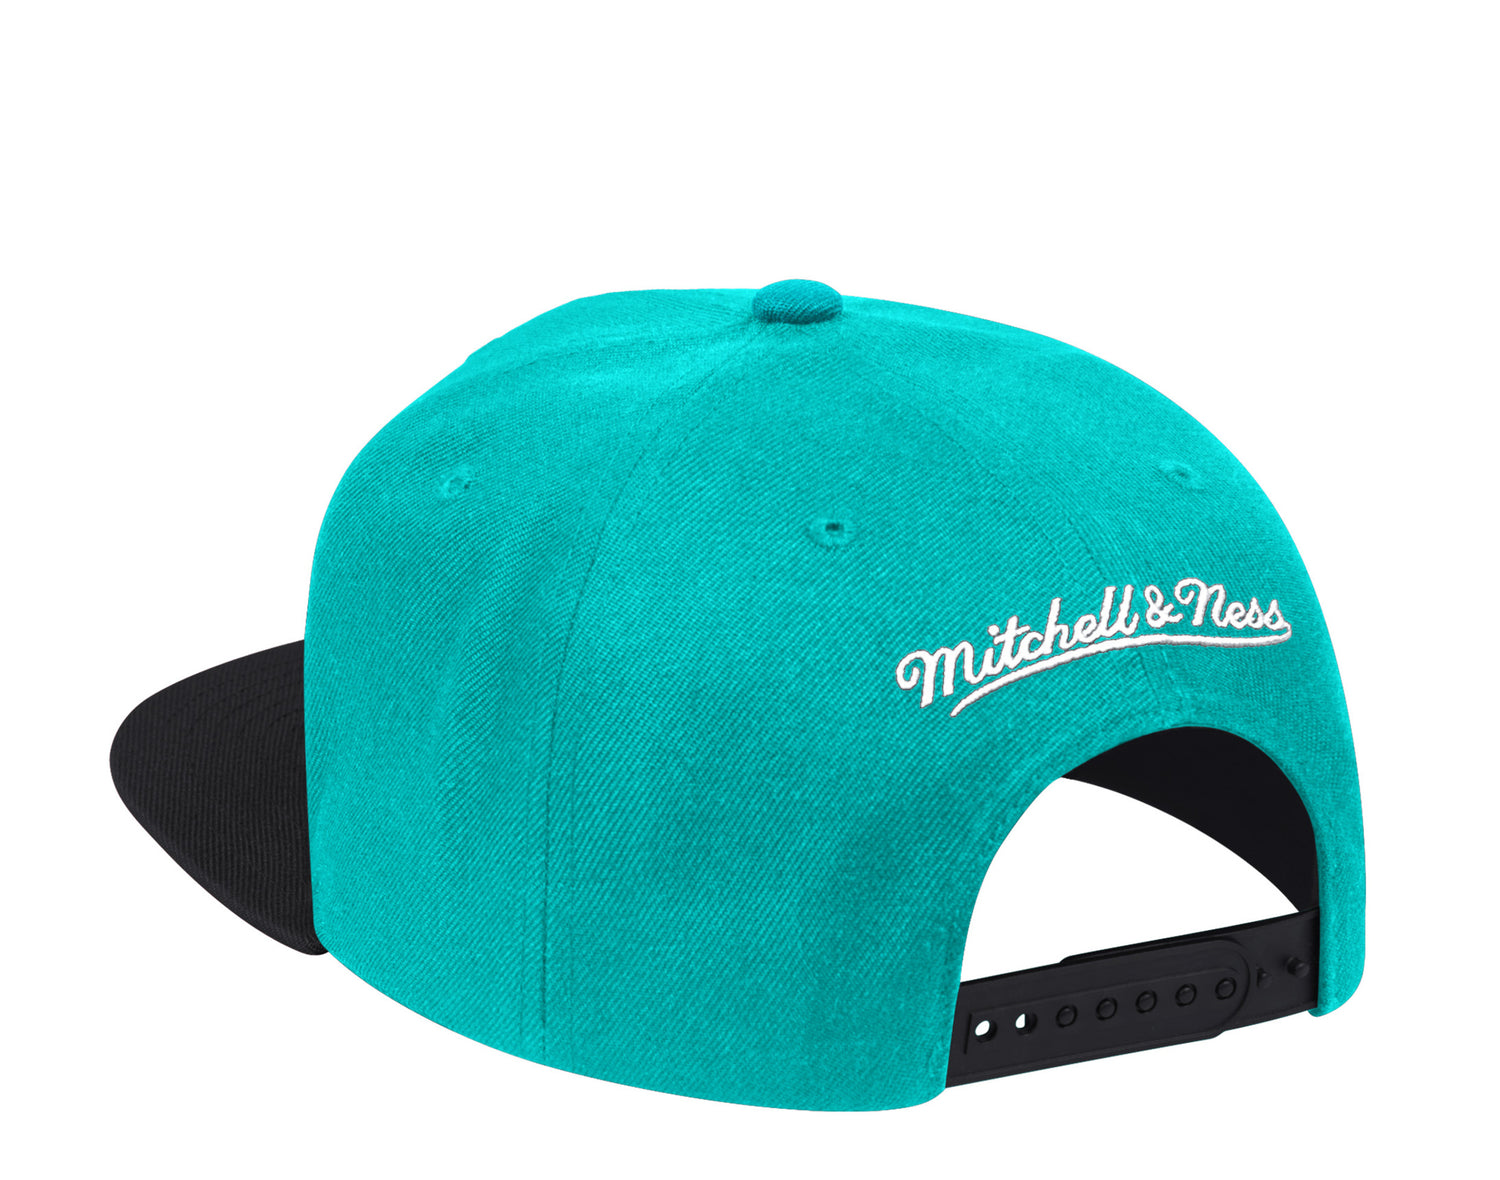 Mitchell & Ness 2 Tone Classic HWC Vancouver Grizzlies Snapback Hat